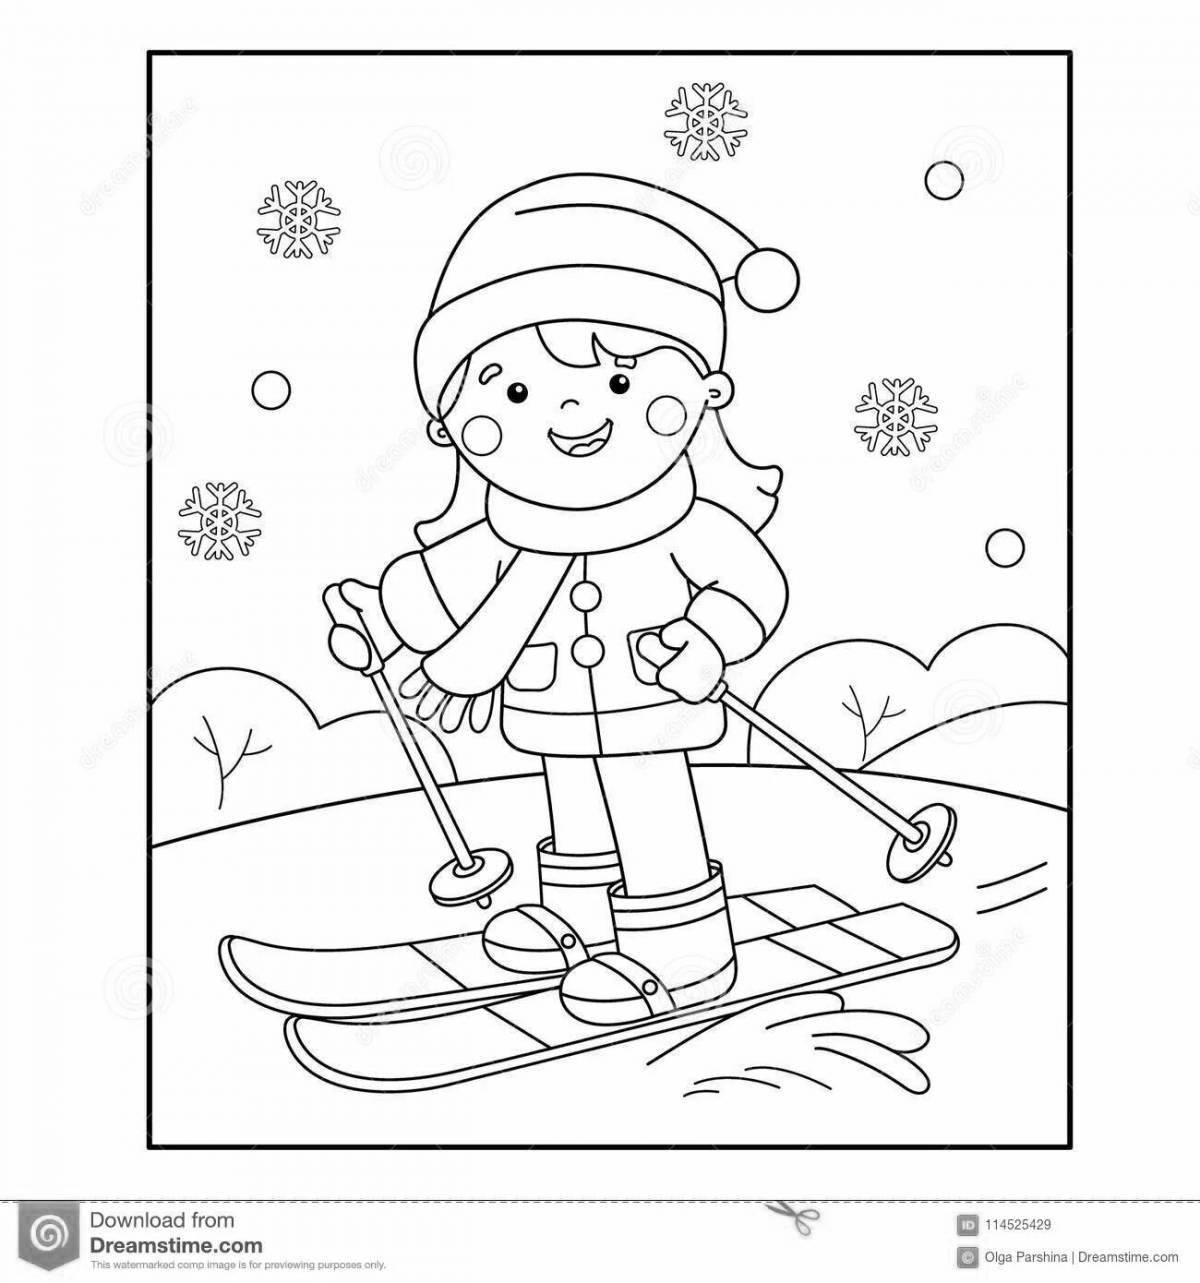 Incredible winter sports coloring book for 6-7 year olds